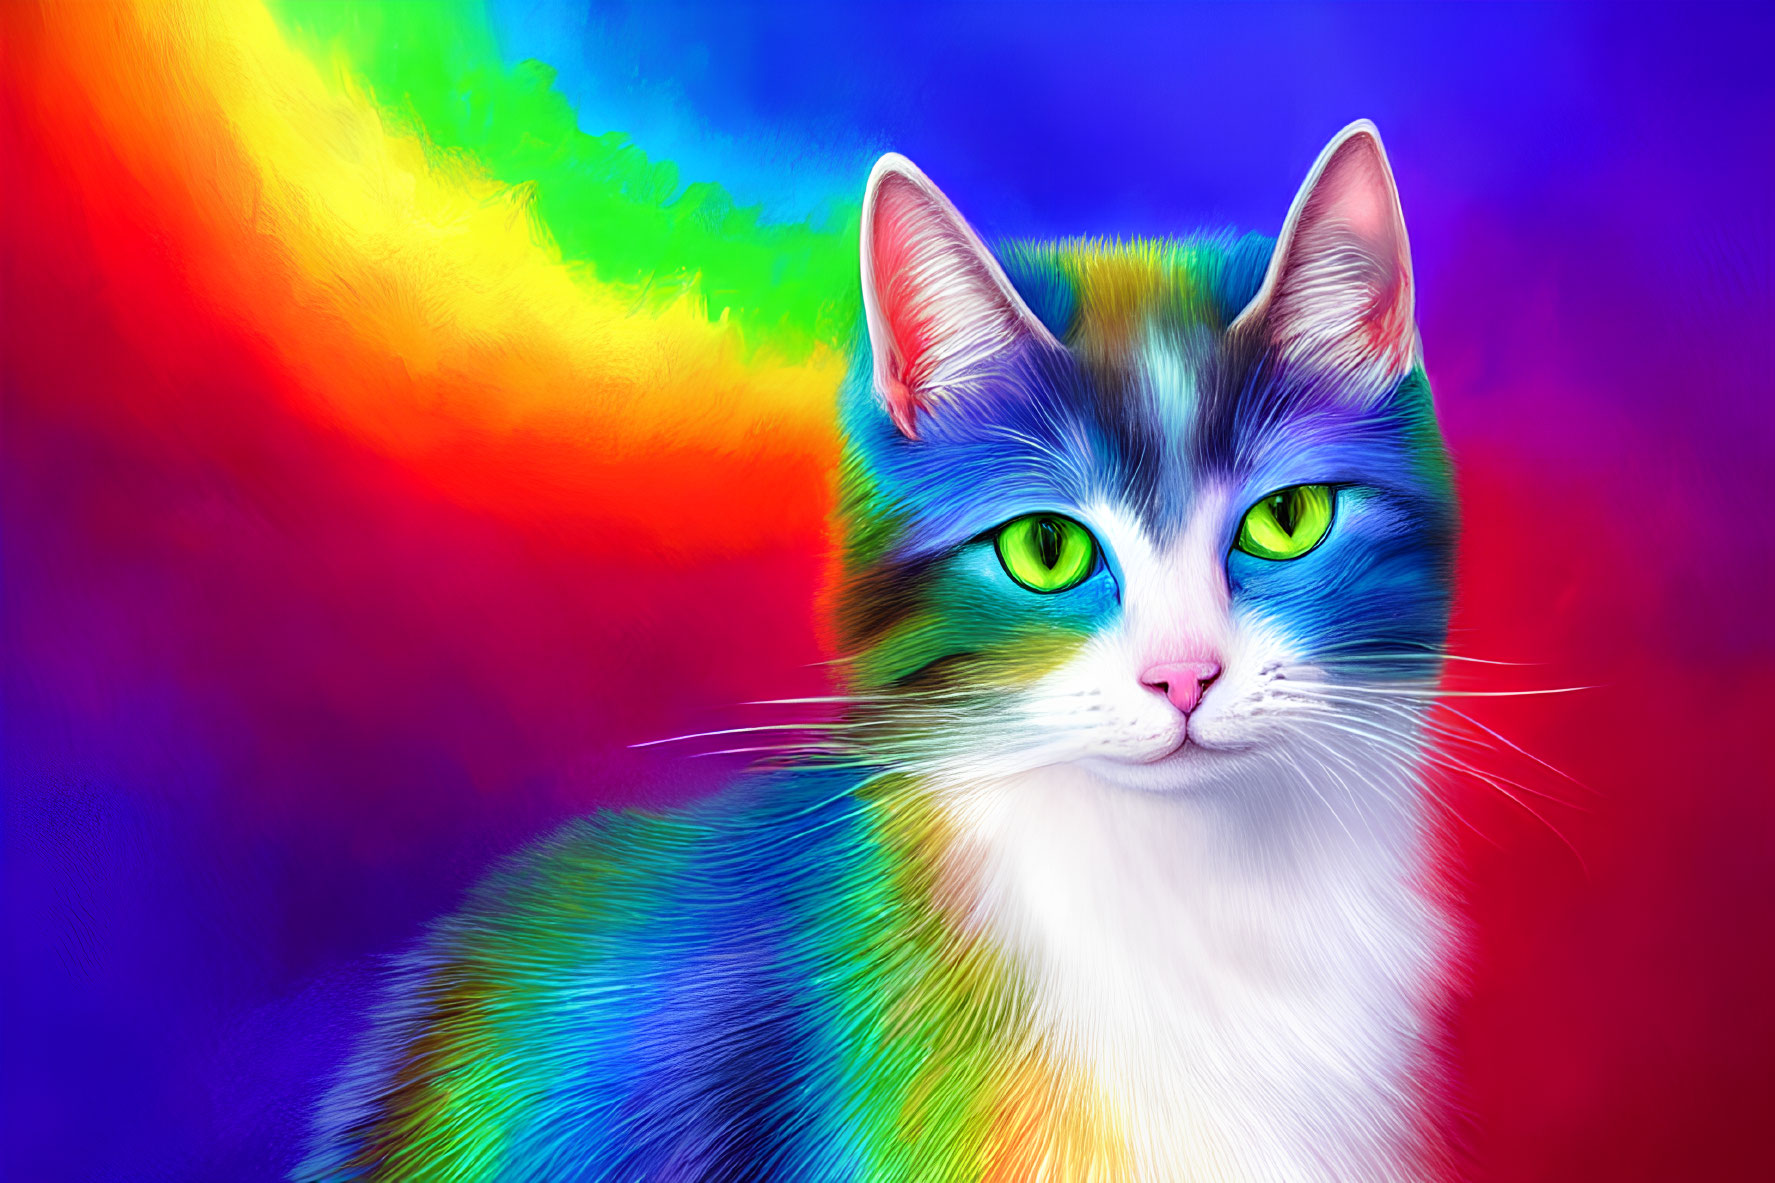 Colorful Digital Art: Cat with Green Eyes on Rainbow Background